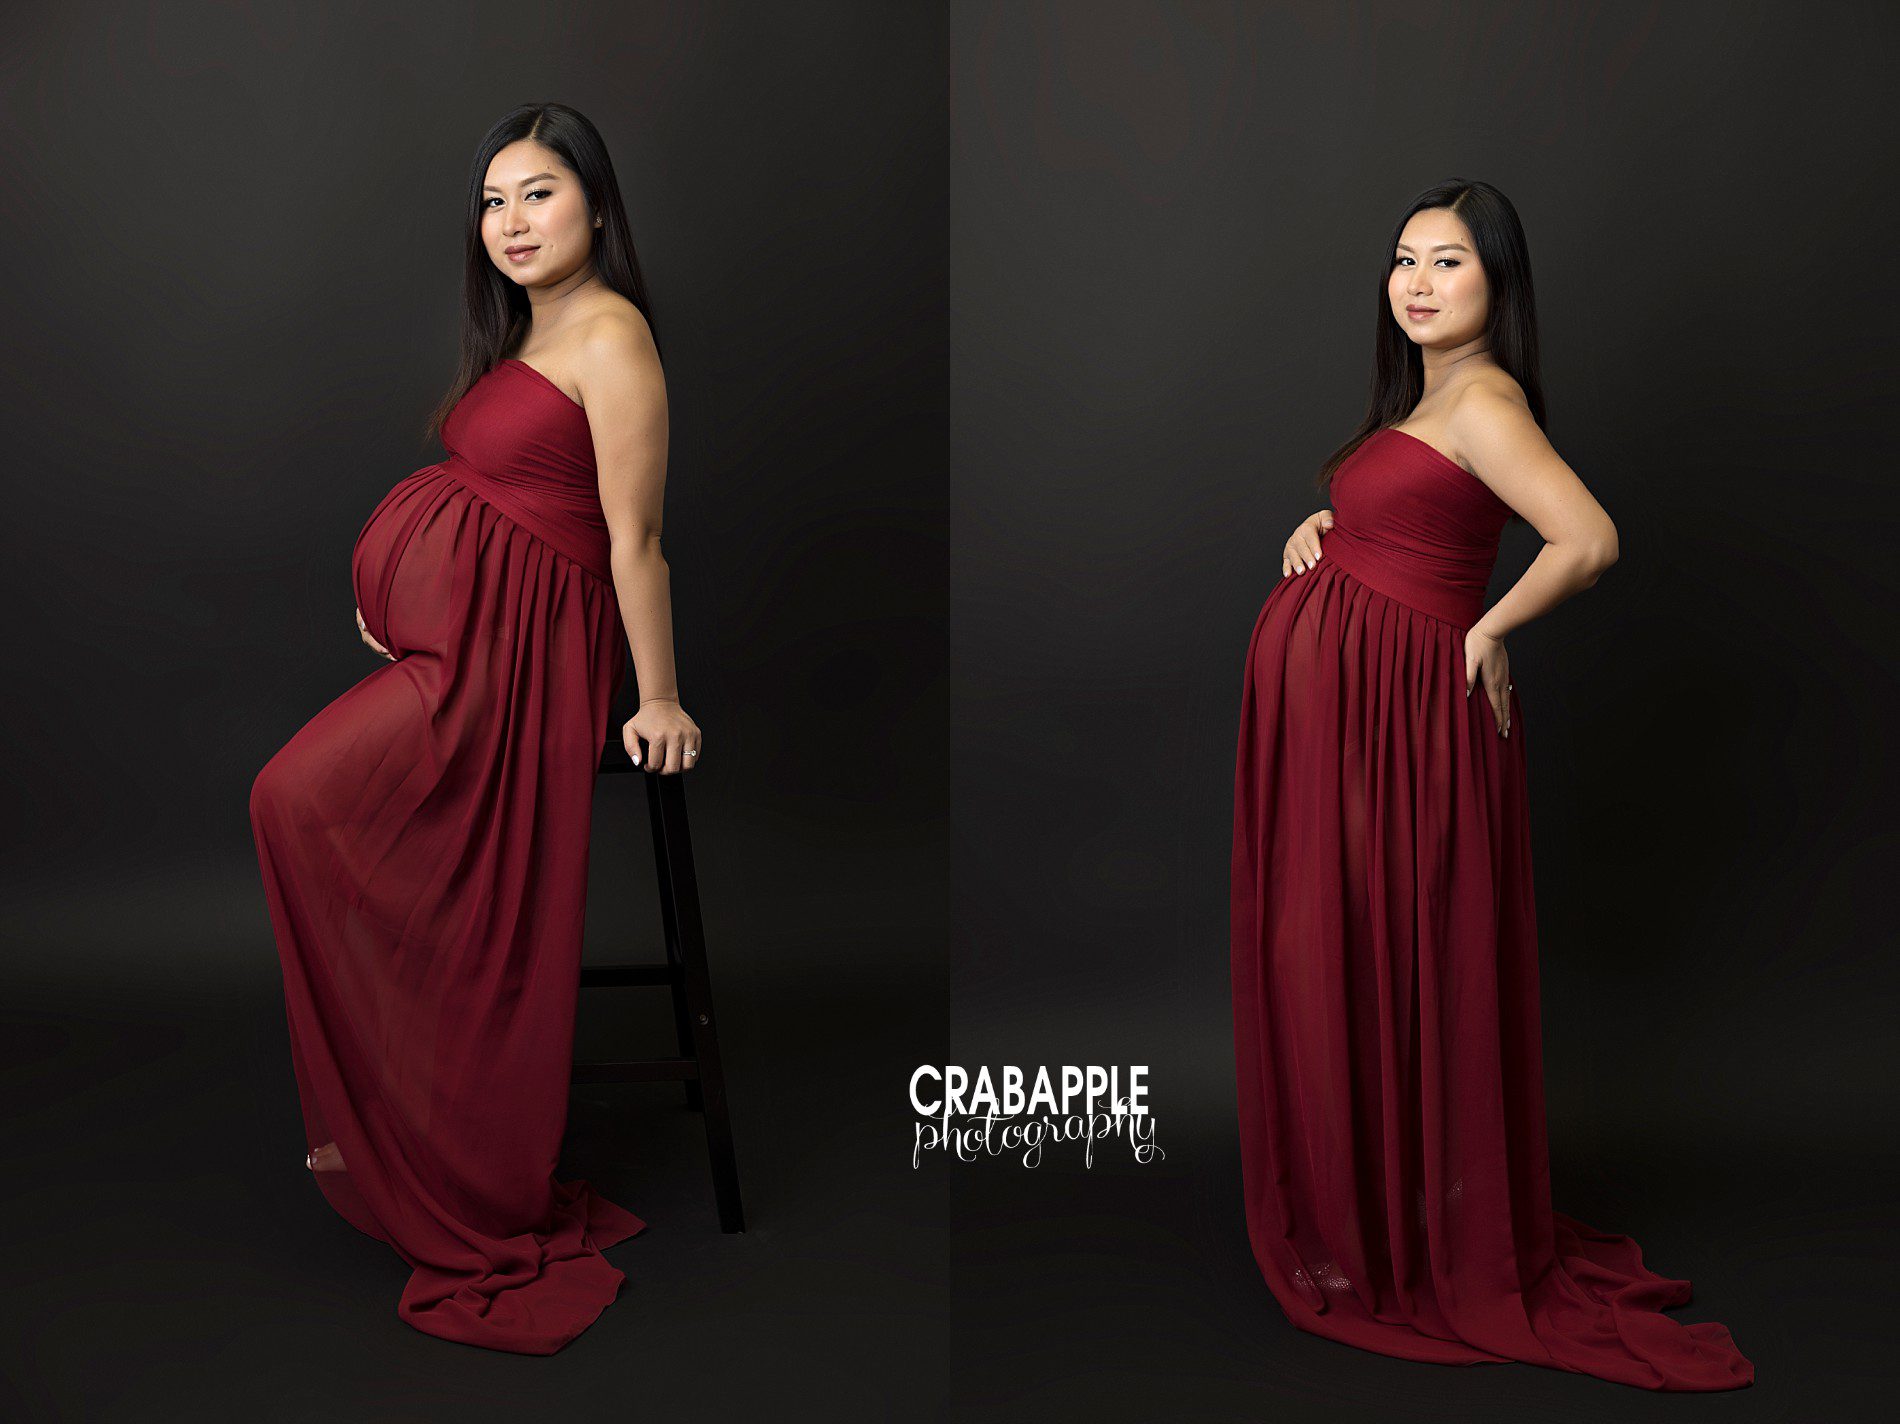 wearing red for maternity photos